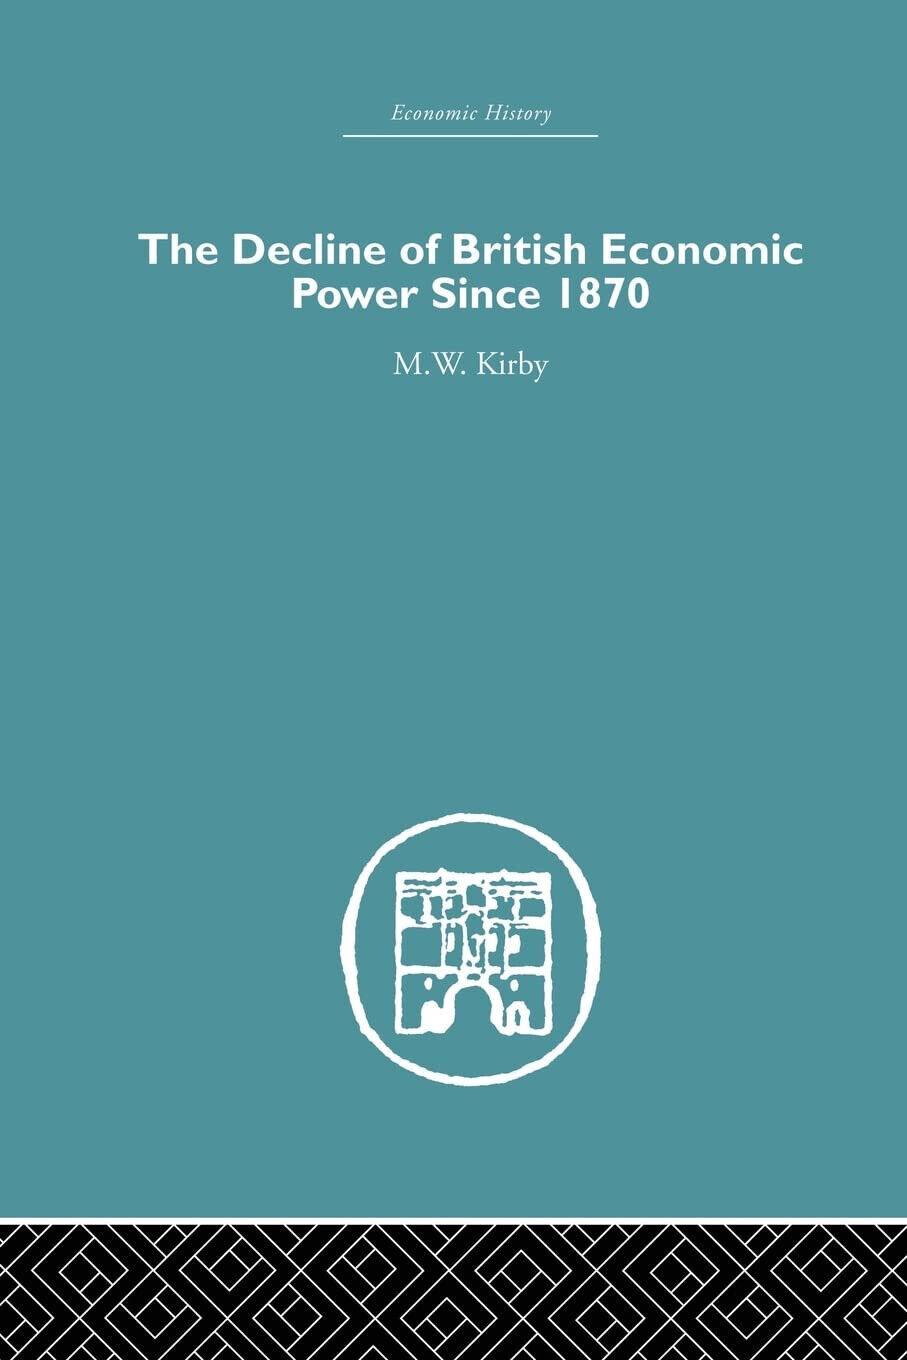 The Decline of British Economic Power Since 1870 - M. W. Kirby - Routledge, 2015